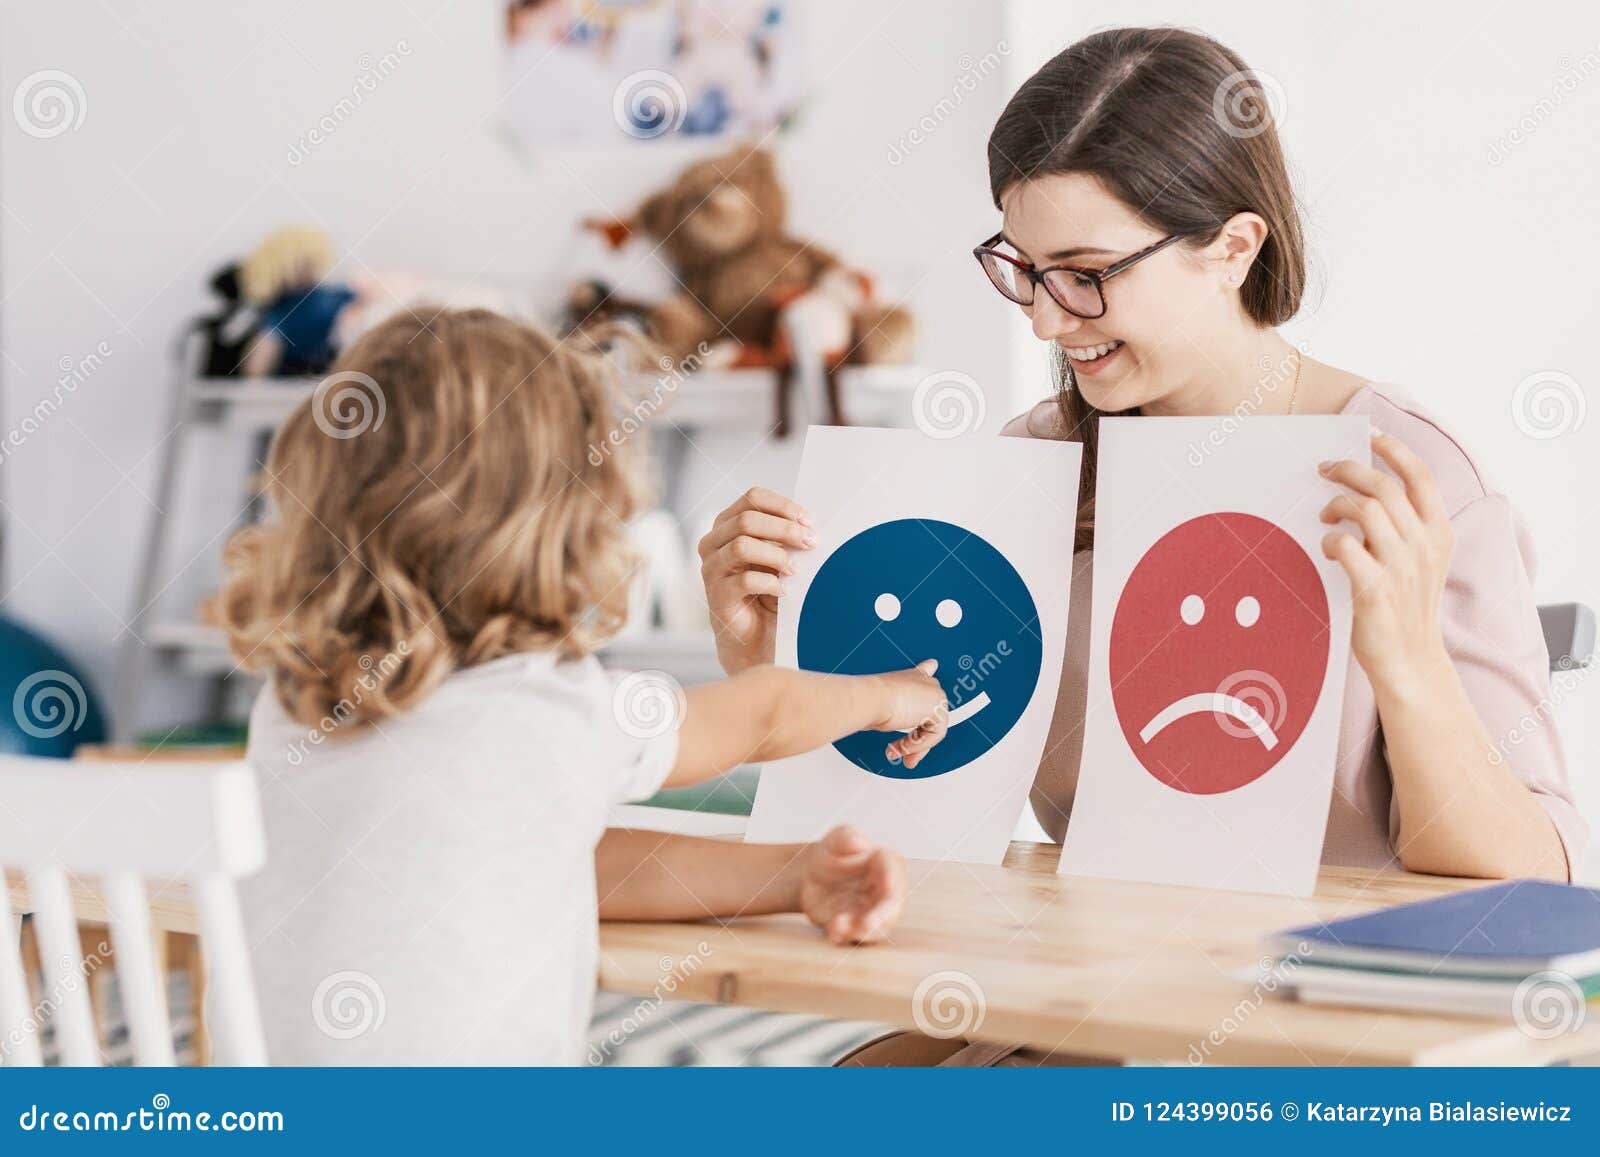 young kid pointing at graphic with a smiley face during a psycho